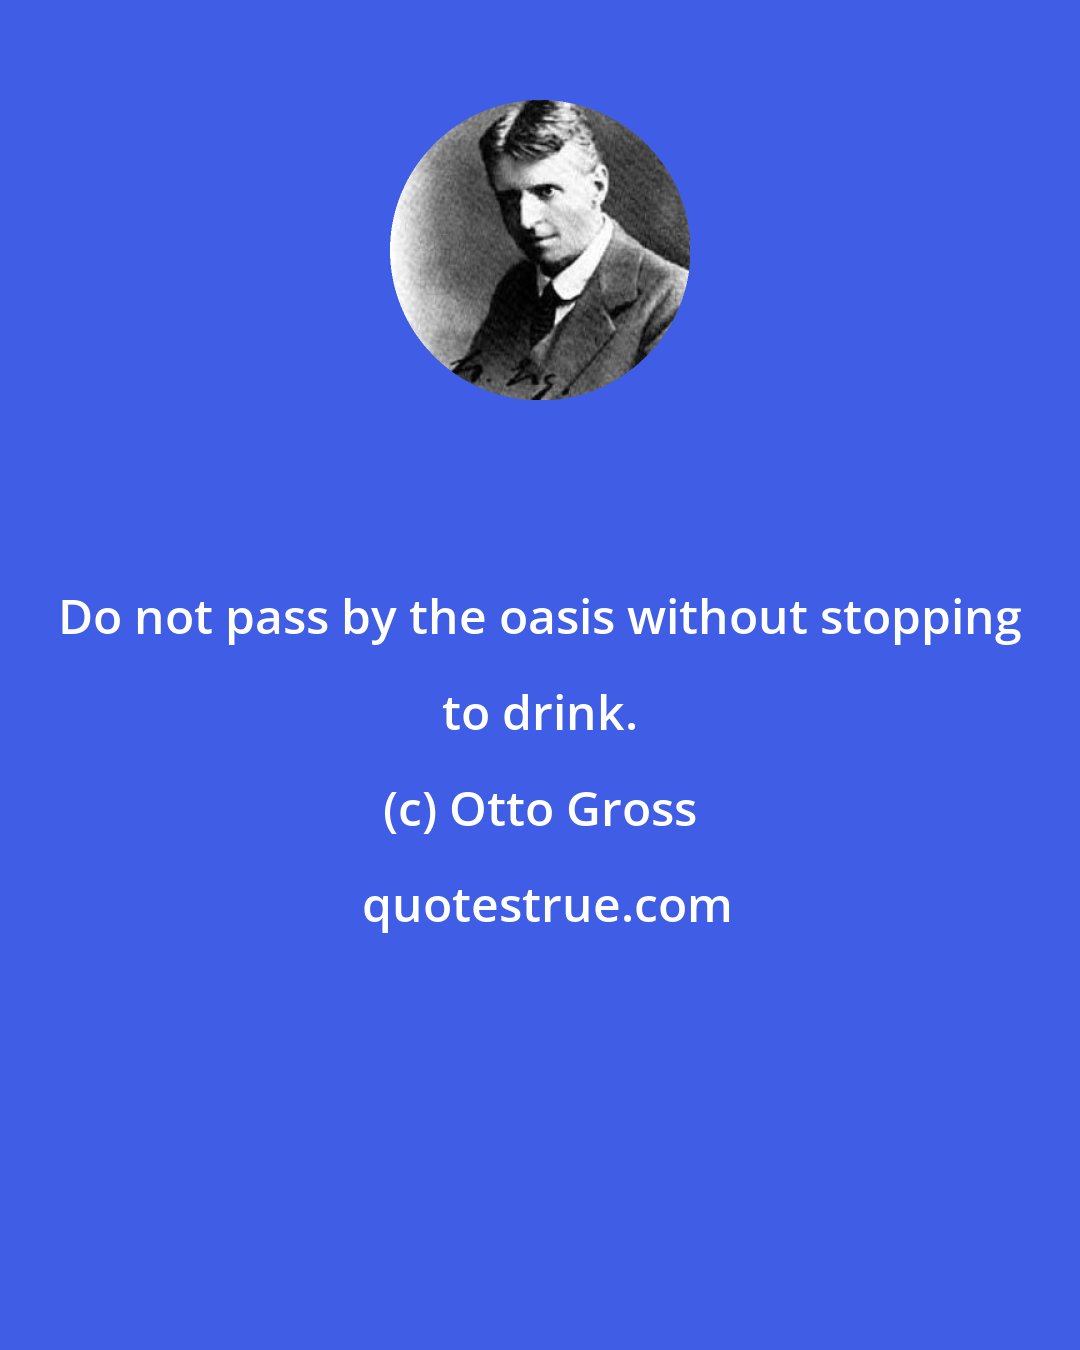 Otto Gross: Do not pass by the oasis without stopping to drink.